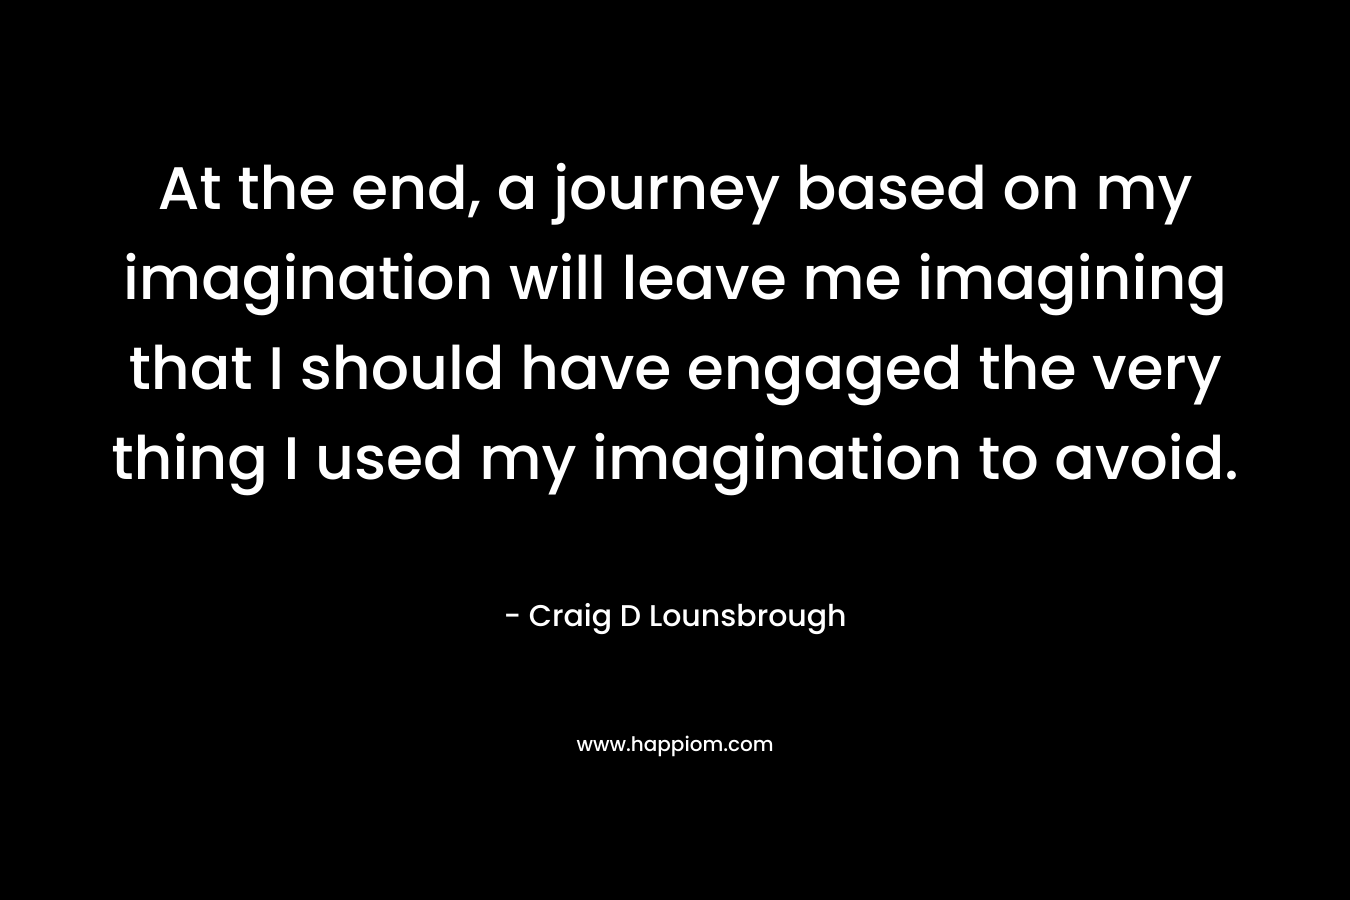 At the end, a journey based on my imagination will leave me imagining that I should have engaged the very thing I used my imagination to avoid.